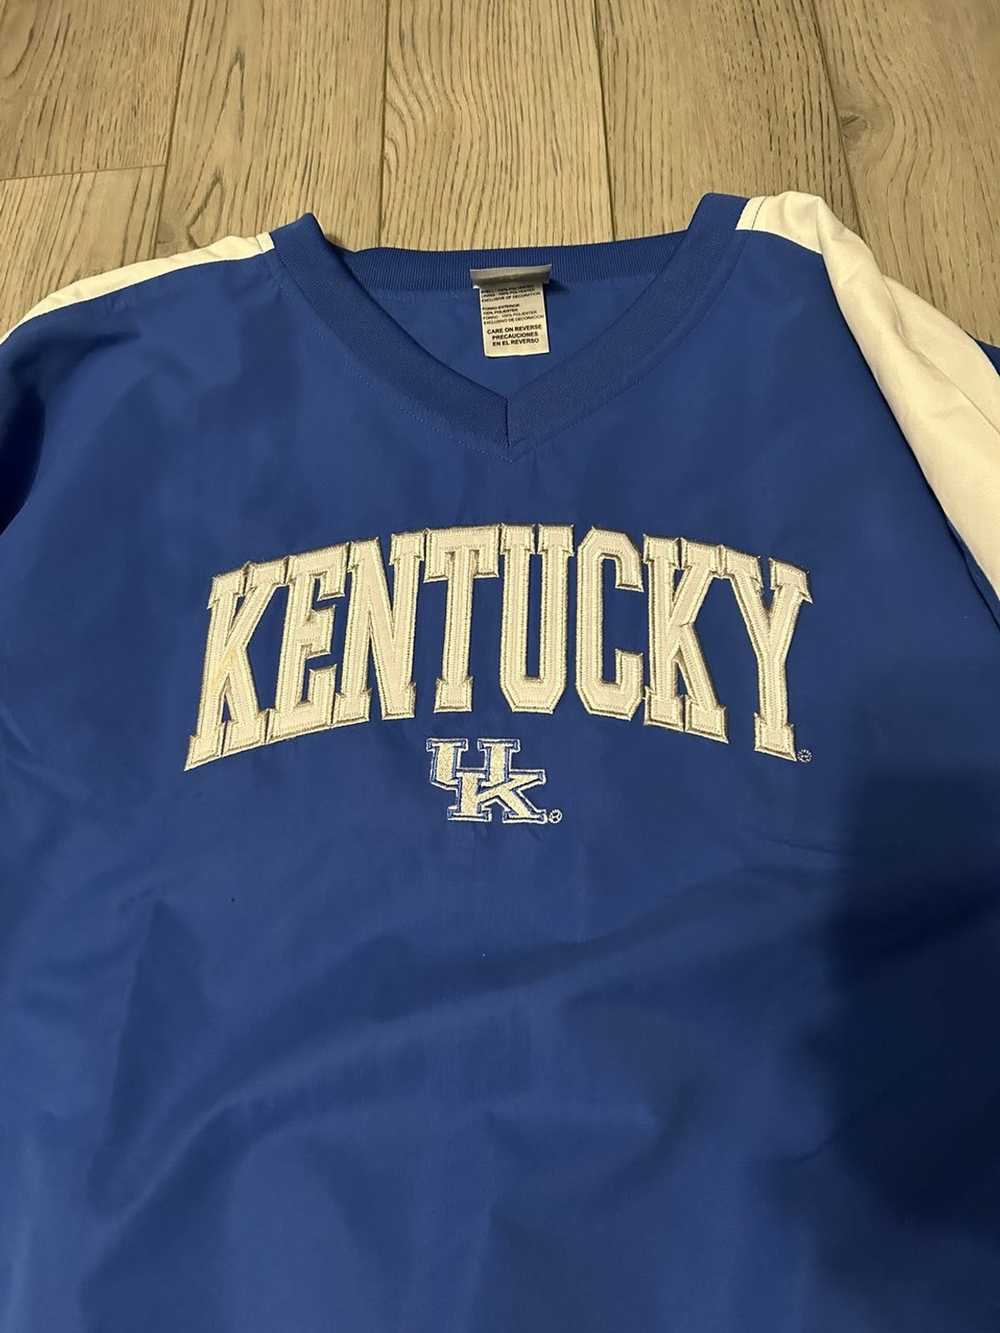 Vintage Kentucky pullover - image 2